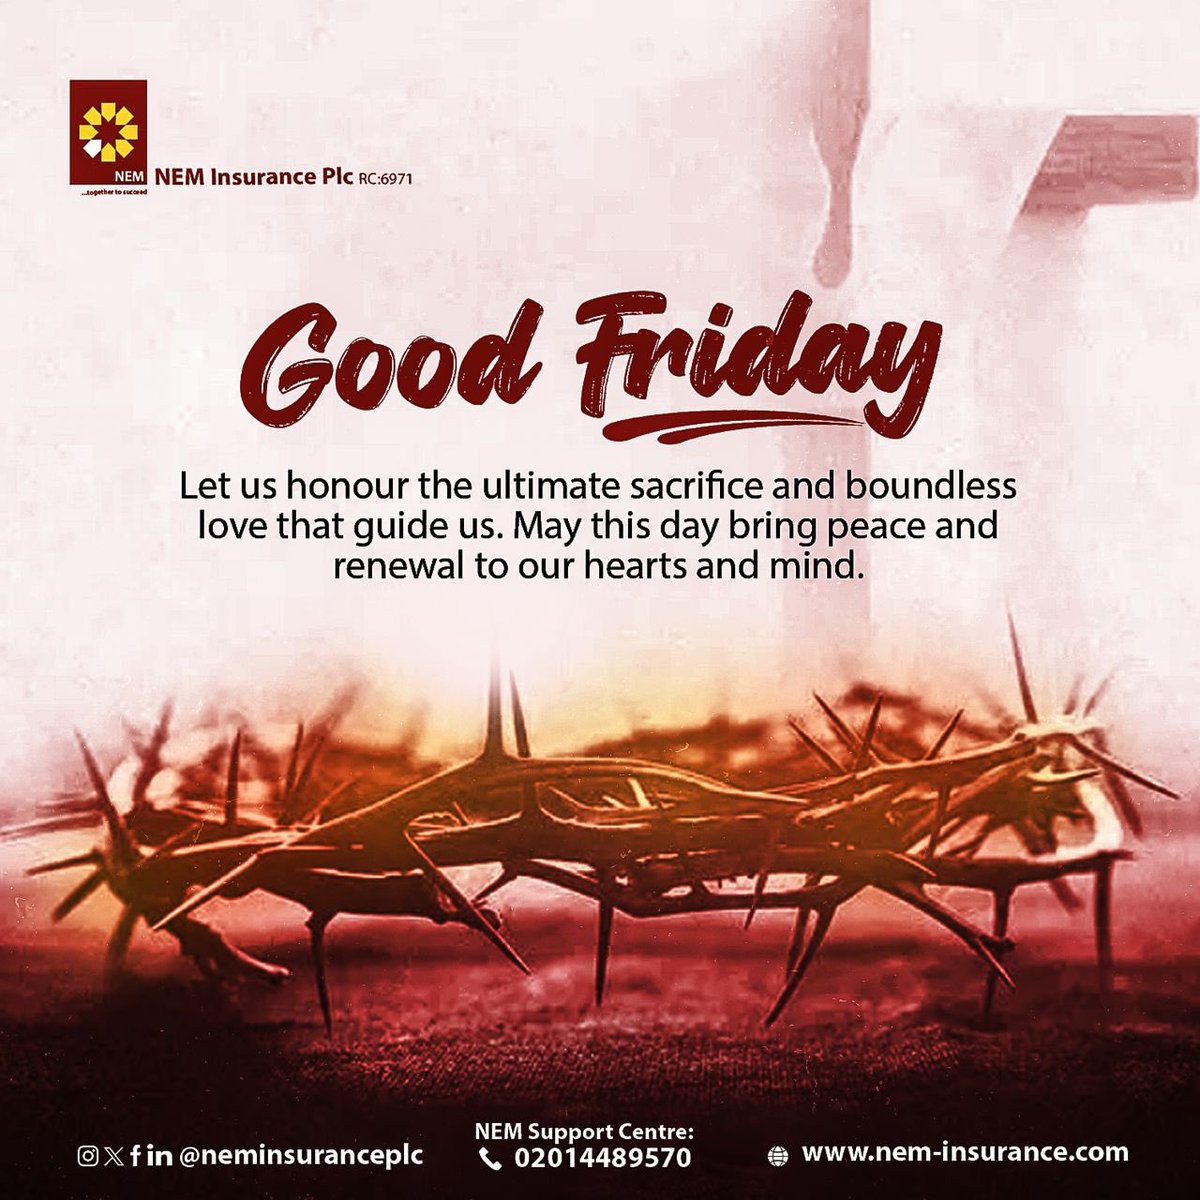 As we commemorate Good Friday, let's take a moment to reflect on the sacrifices made and the blessings received. May this day be a reminder of hope, renewal, and the power of faith. #GoodFriday #NEMInsurancePlc #BeNEMSure